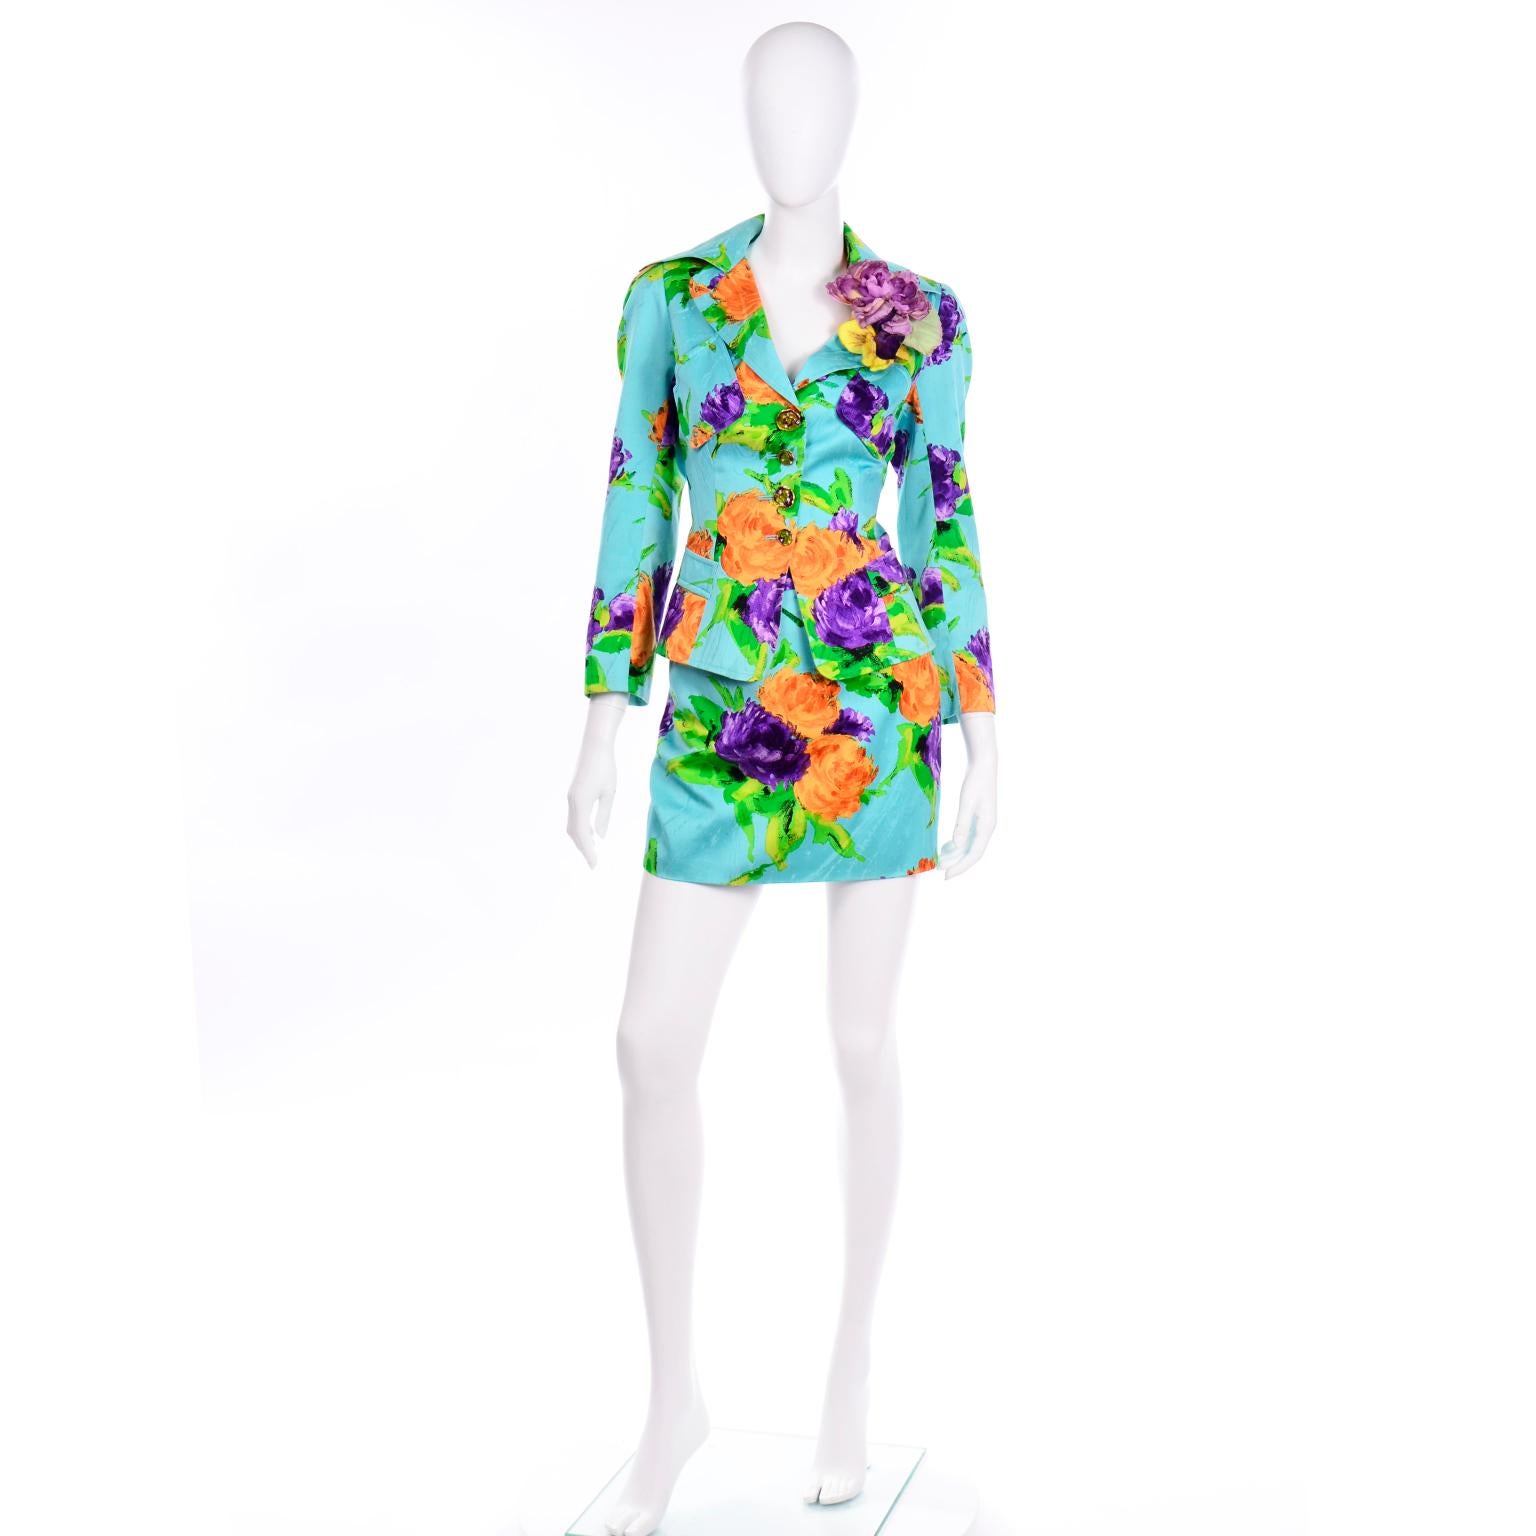 We love this bold, colorful Christian Lacroix floral print skirt suit in shades of turquoise, orange, purple, and green. This suit is such a  versatile ensemble, as it can be worn not only as a suit,  but  as fun separates with other pieces!  The